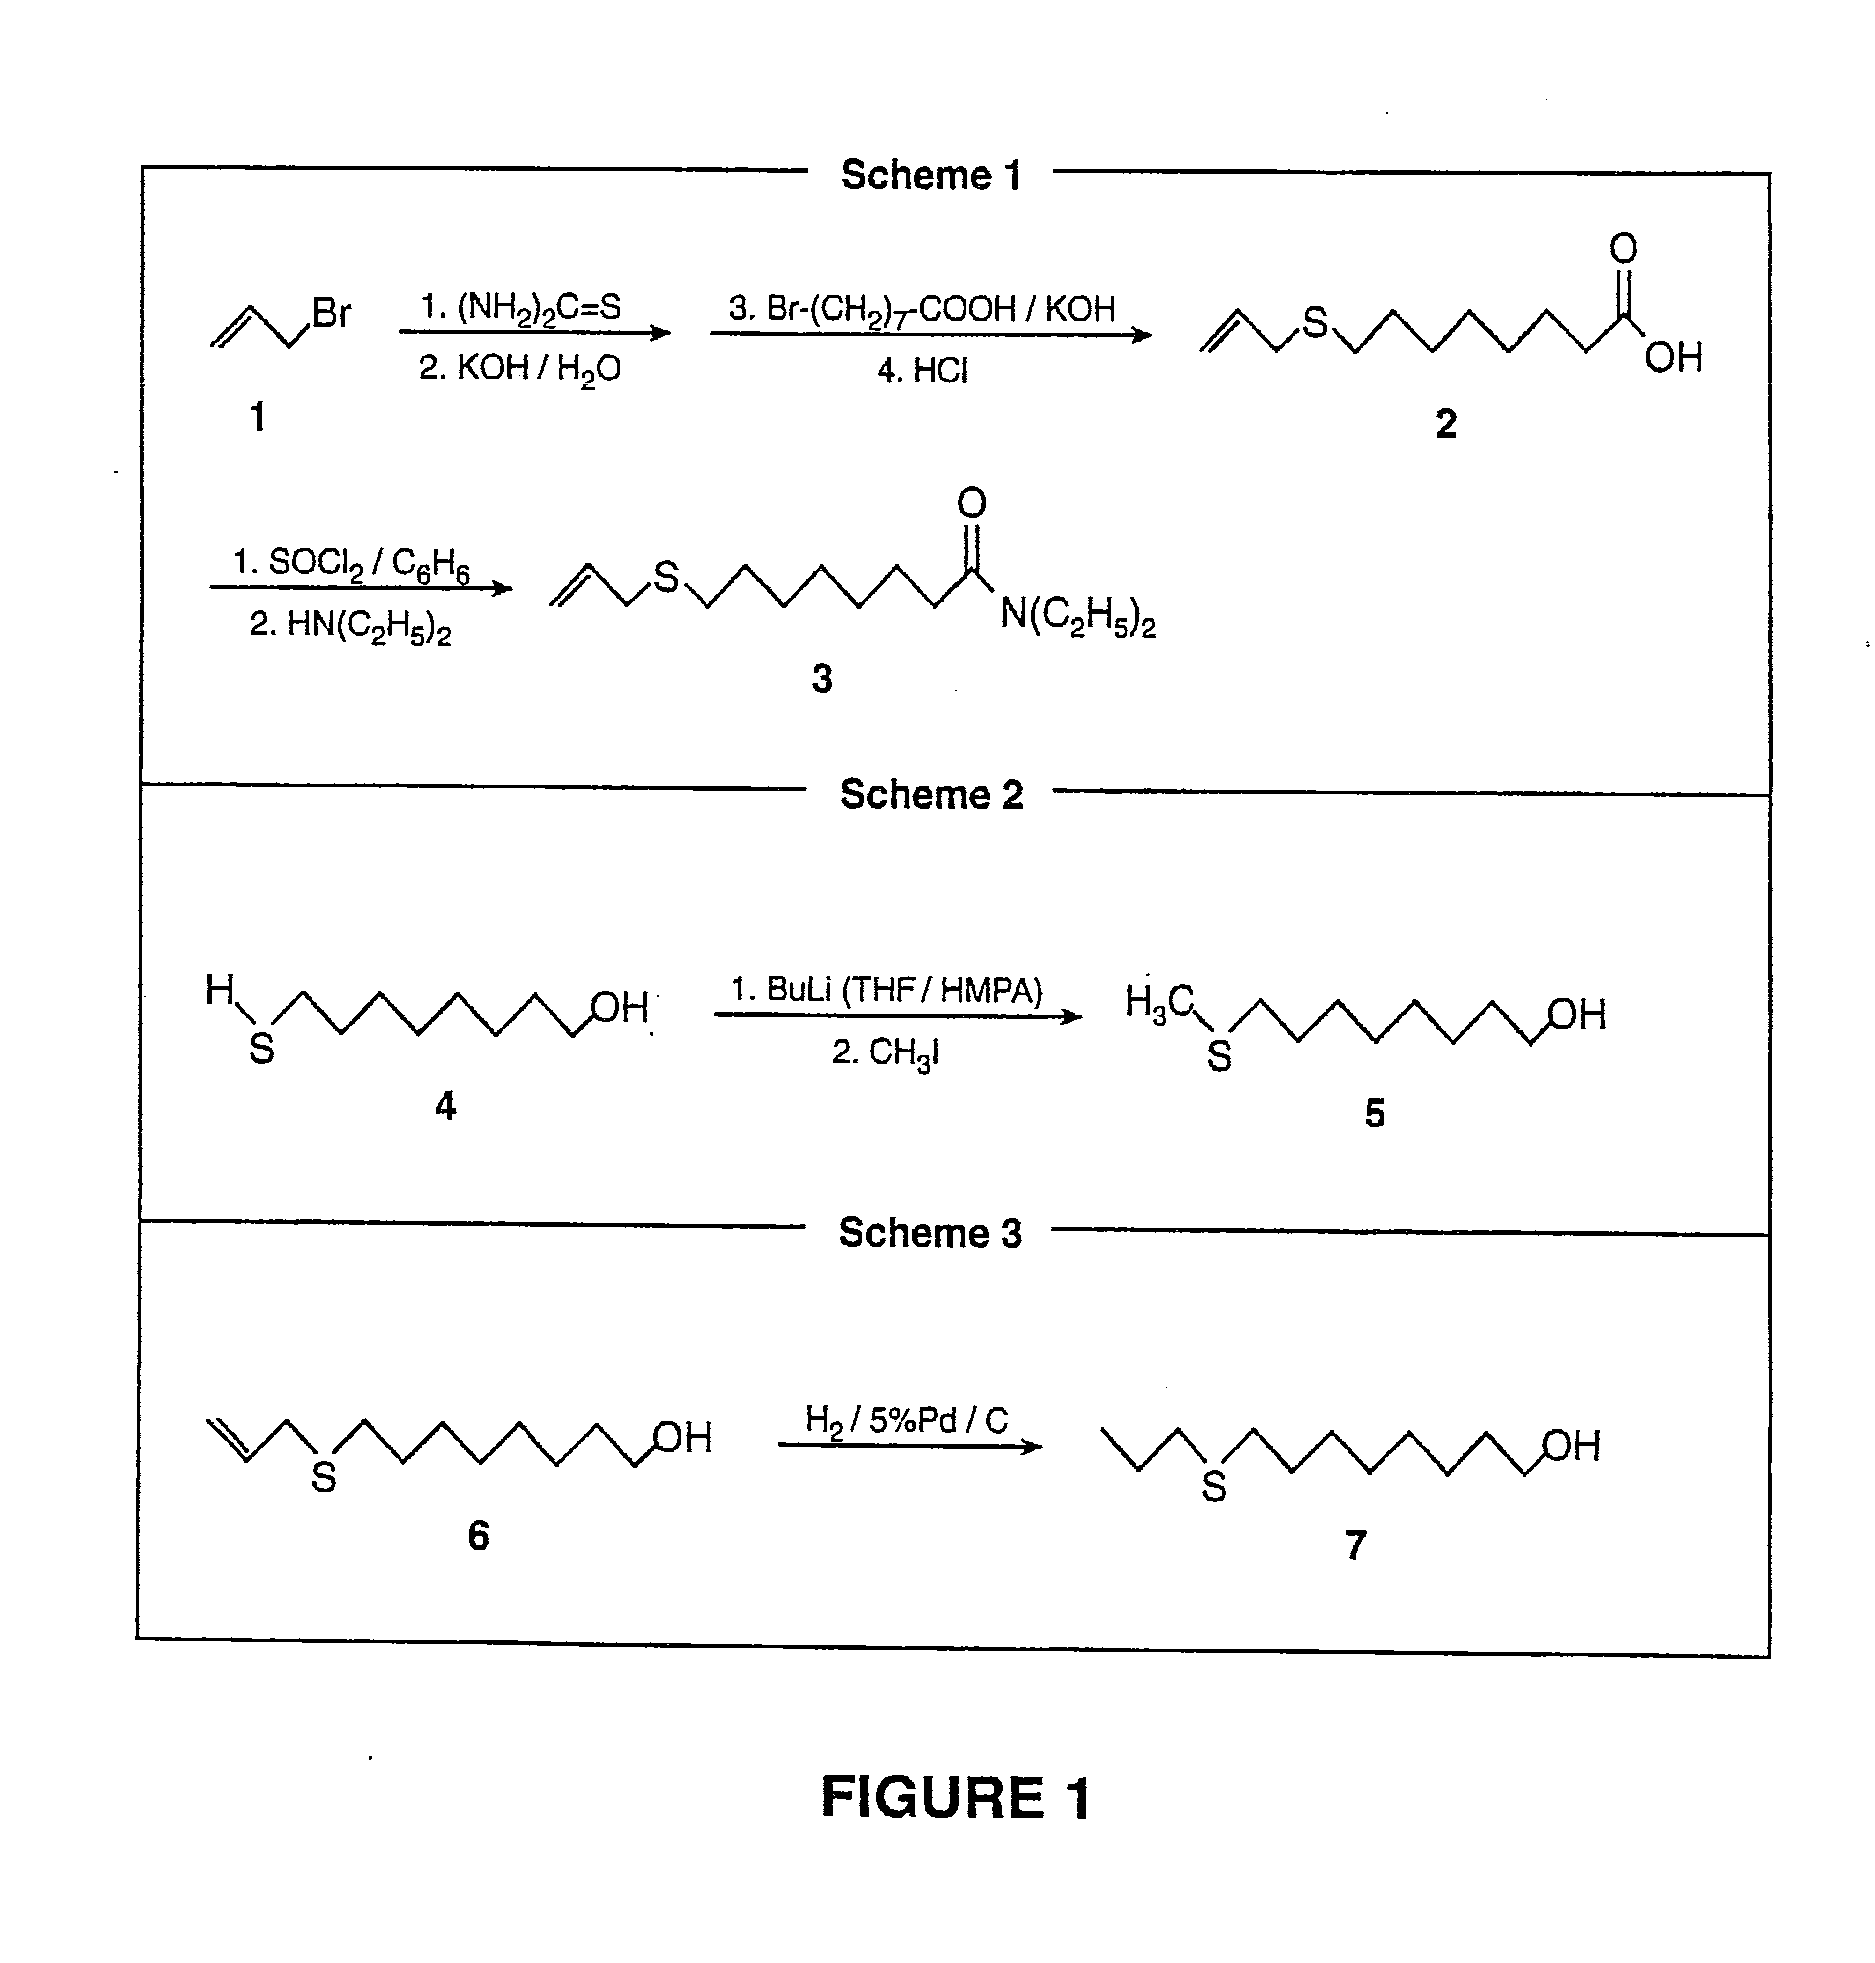 Compounds and methods for repelling blood-feeding arthropods and deterring their landing and feeding